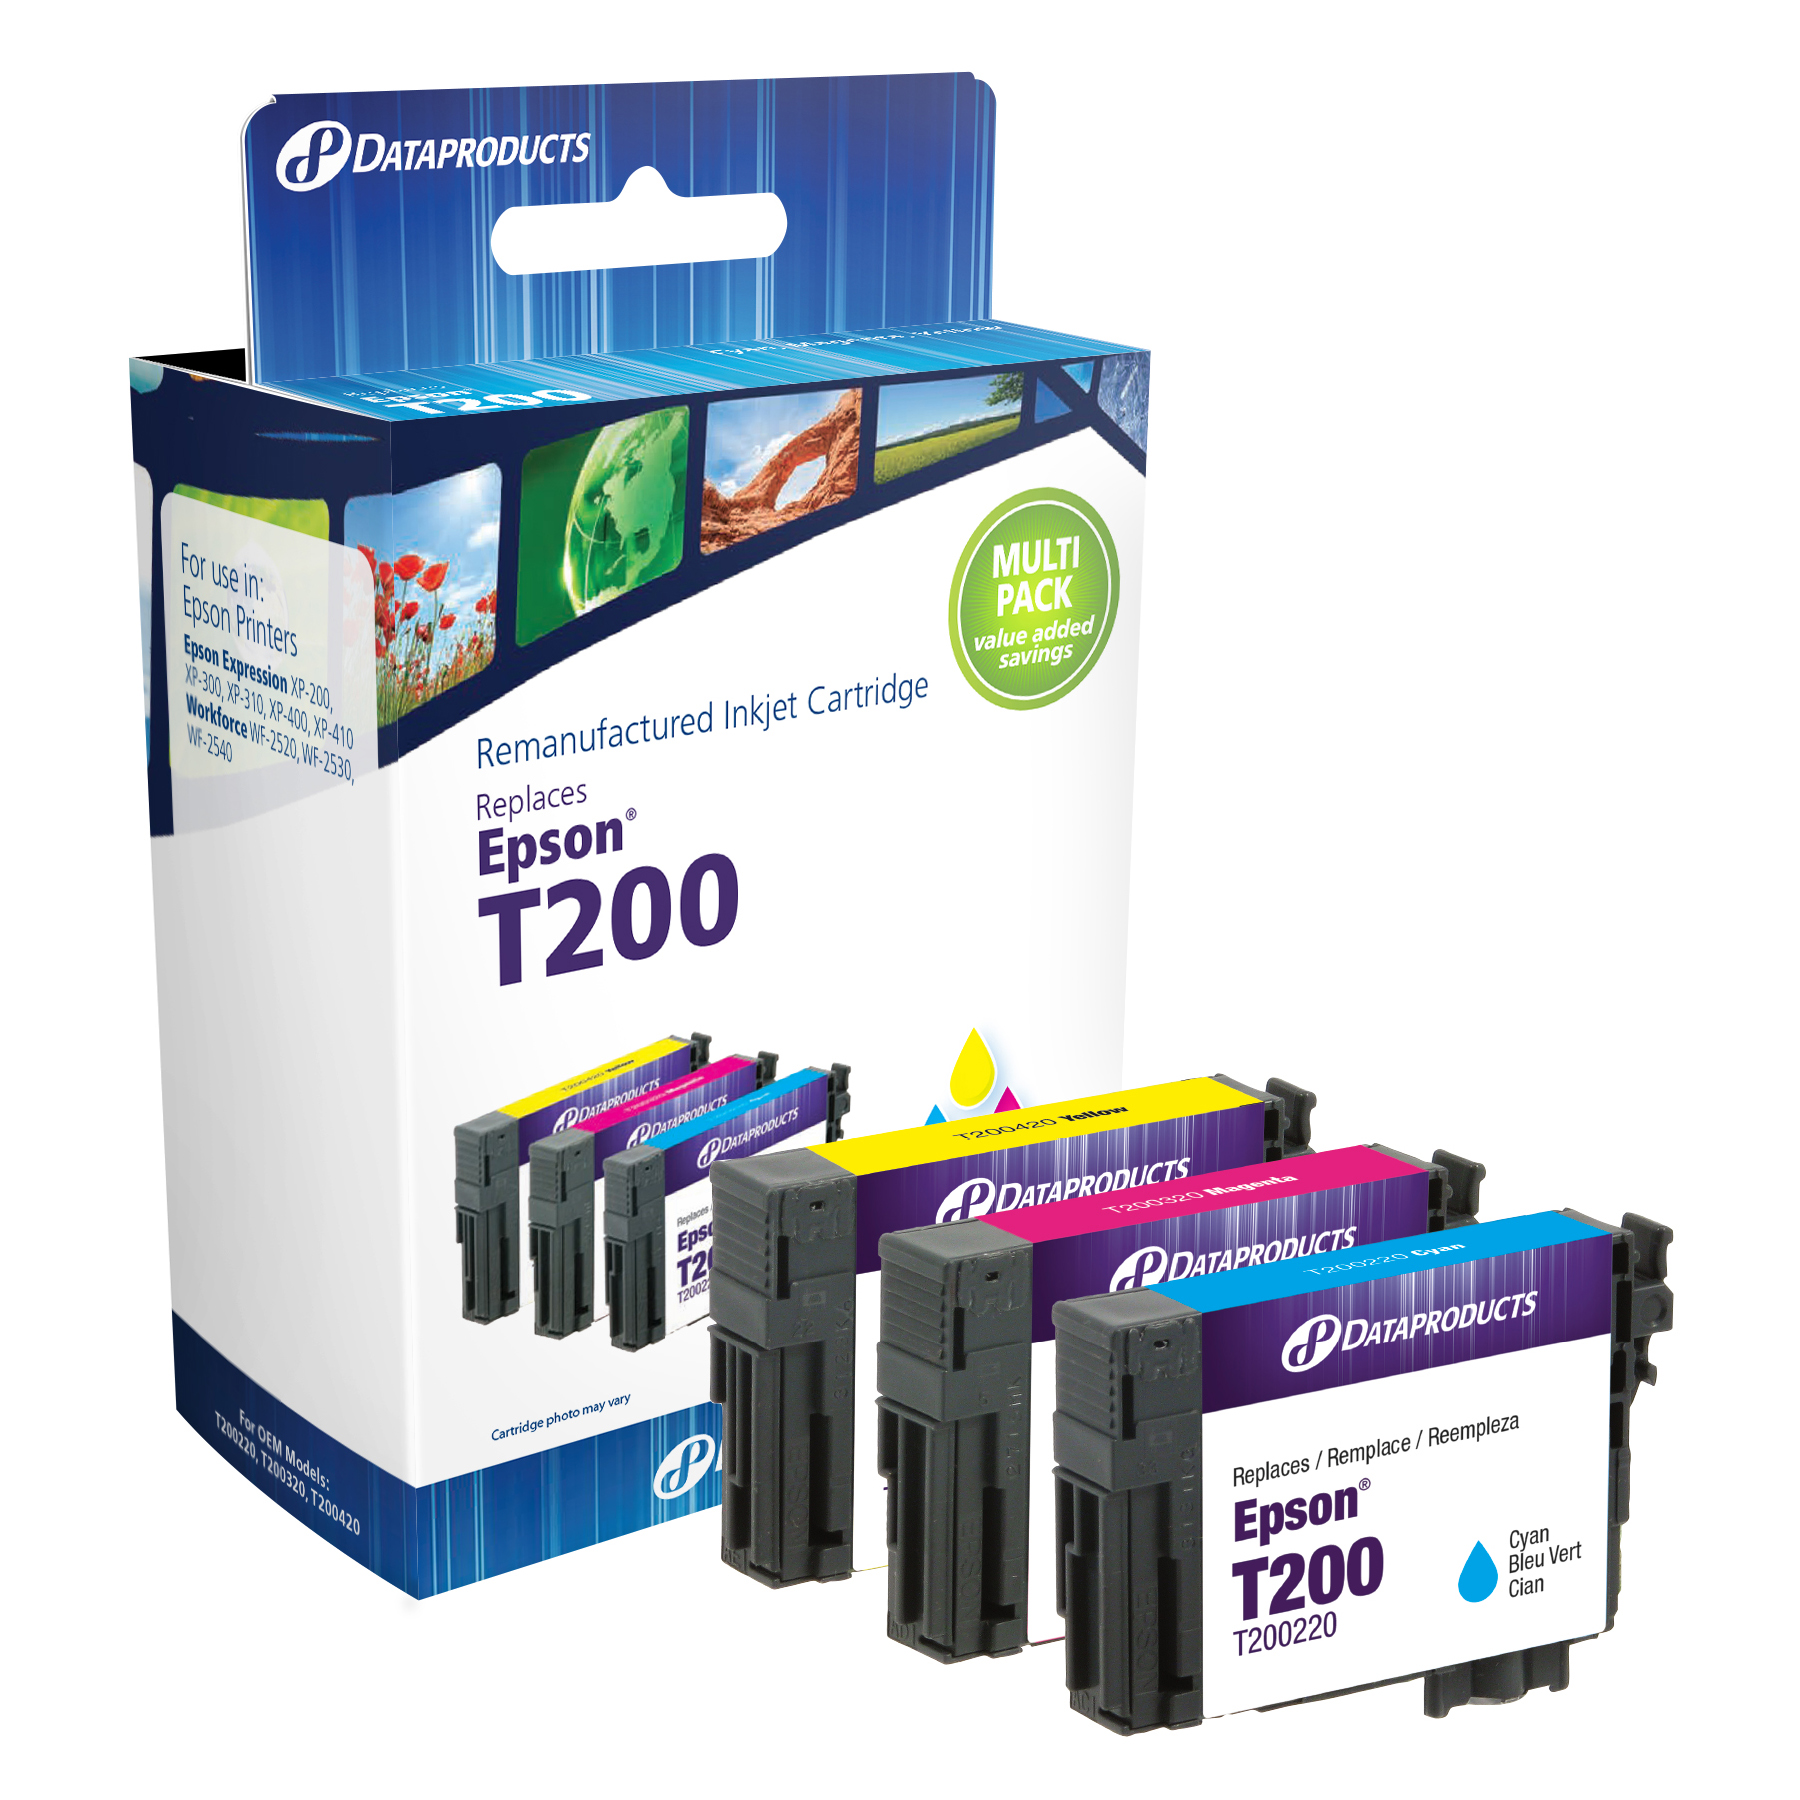 Dataproducts DPCT200CMY Remanufactured Inkjet Cartridge for Epson T200 - CMY Color Ink 3-Pack